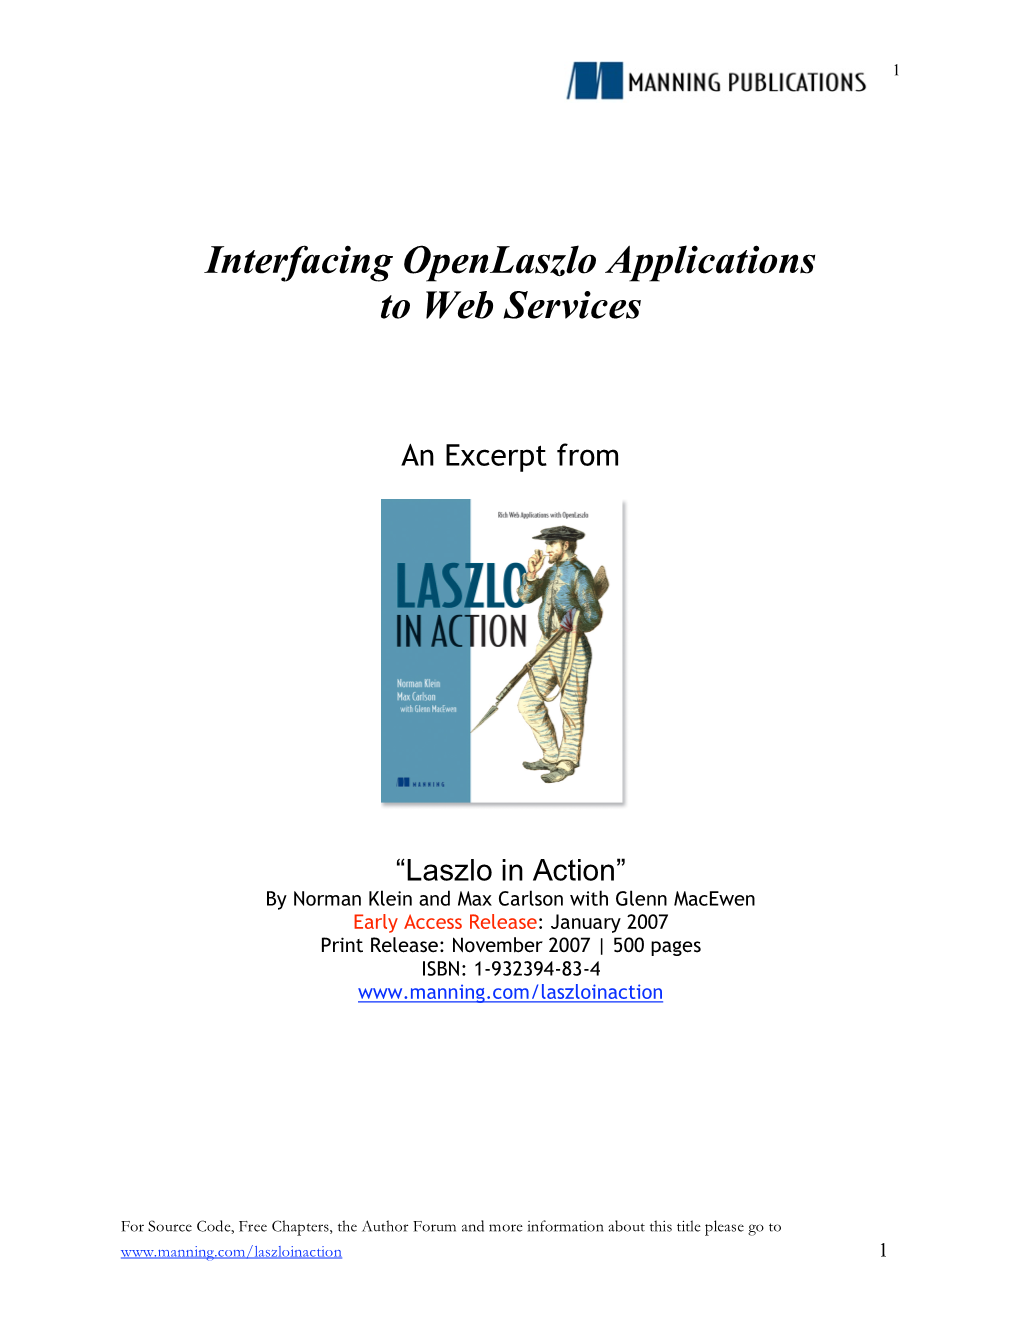 Interfacing Openlaszlo Applications to Web Services